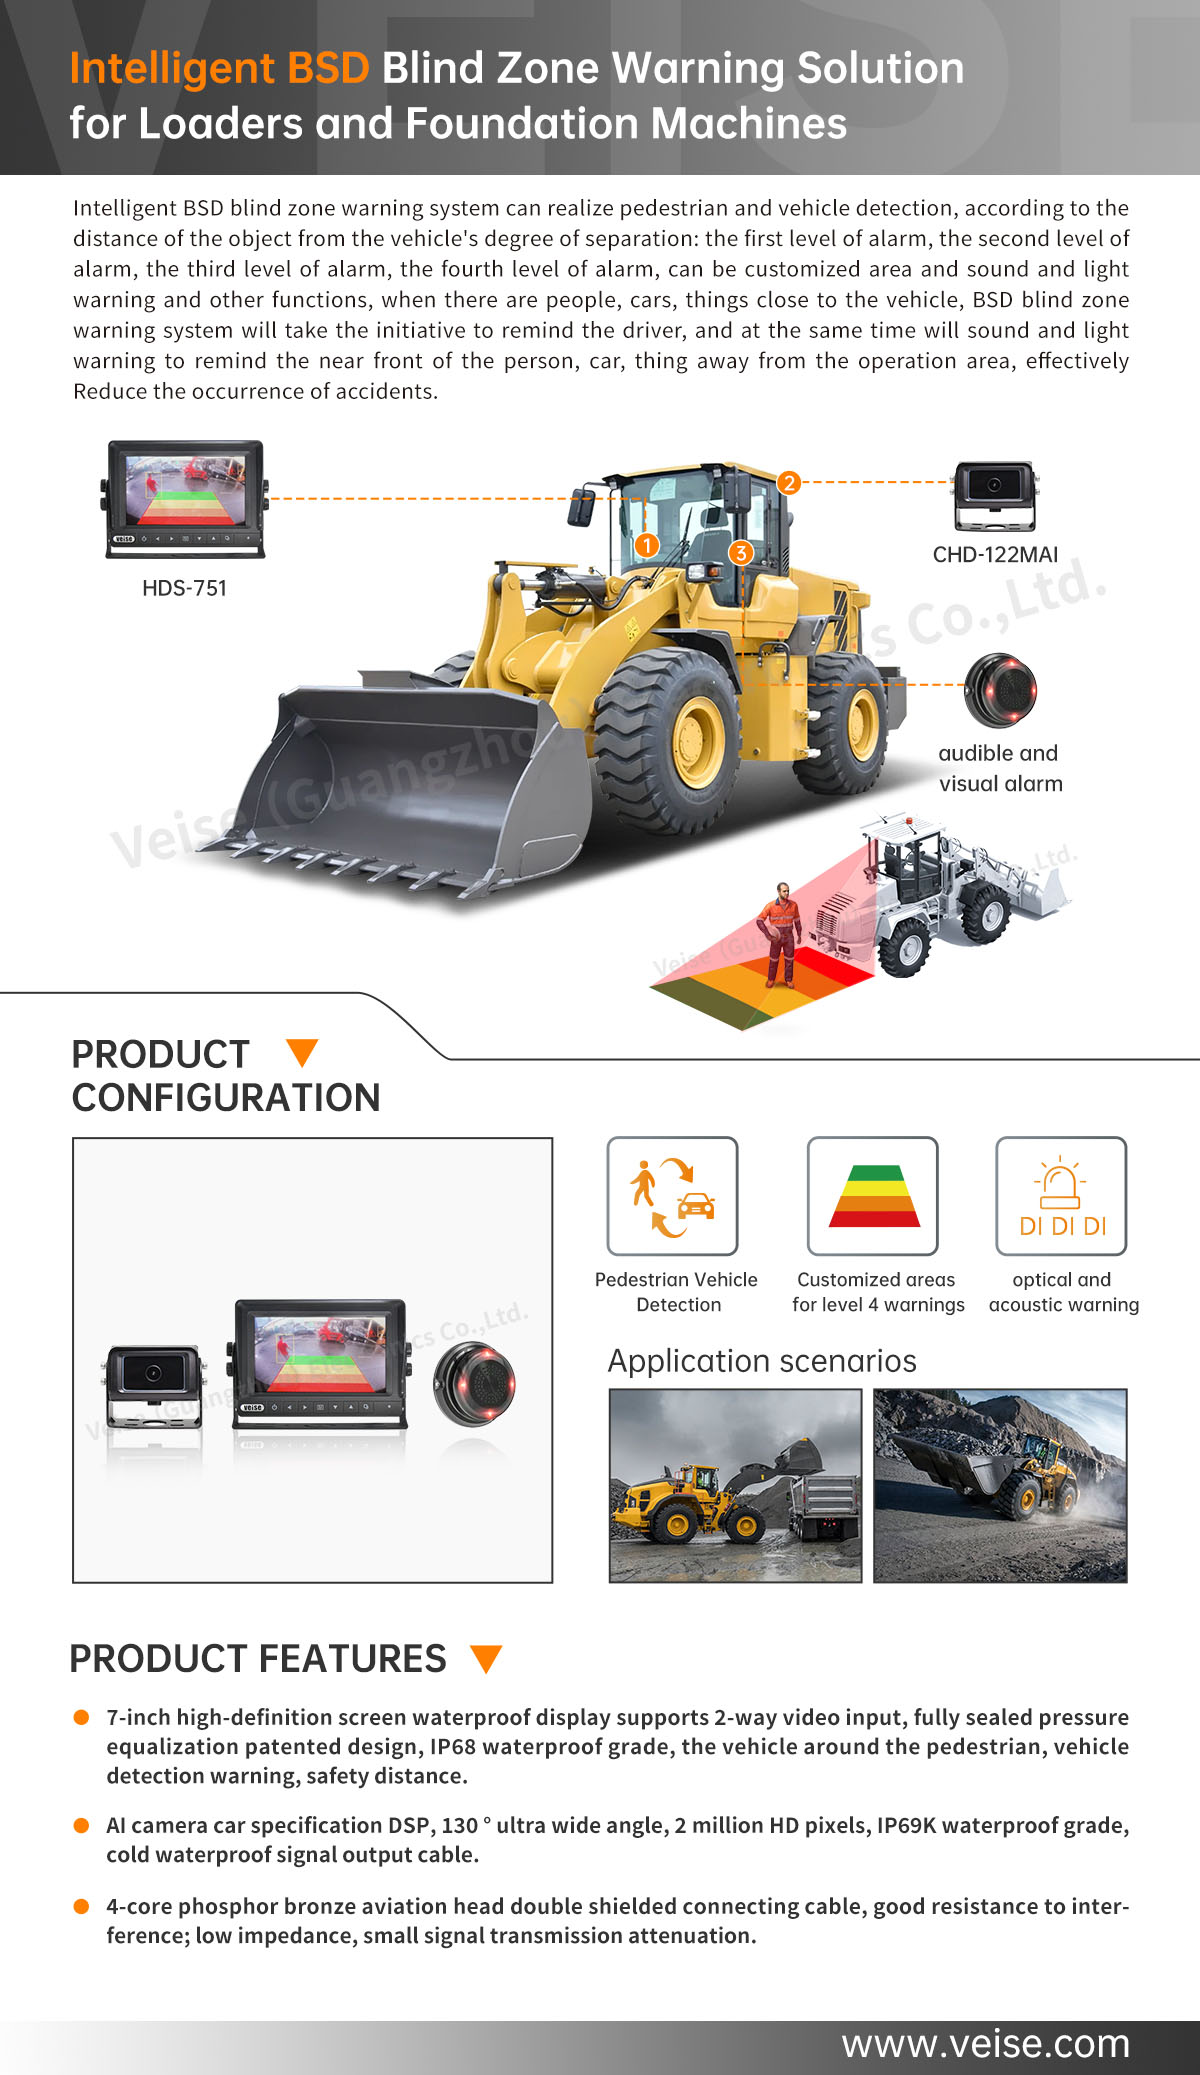 Intelligent BSD Blind Zone Warning Solution for Loaders and Foundation Machines